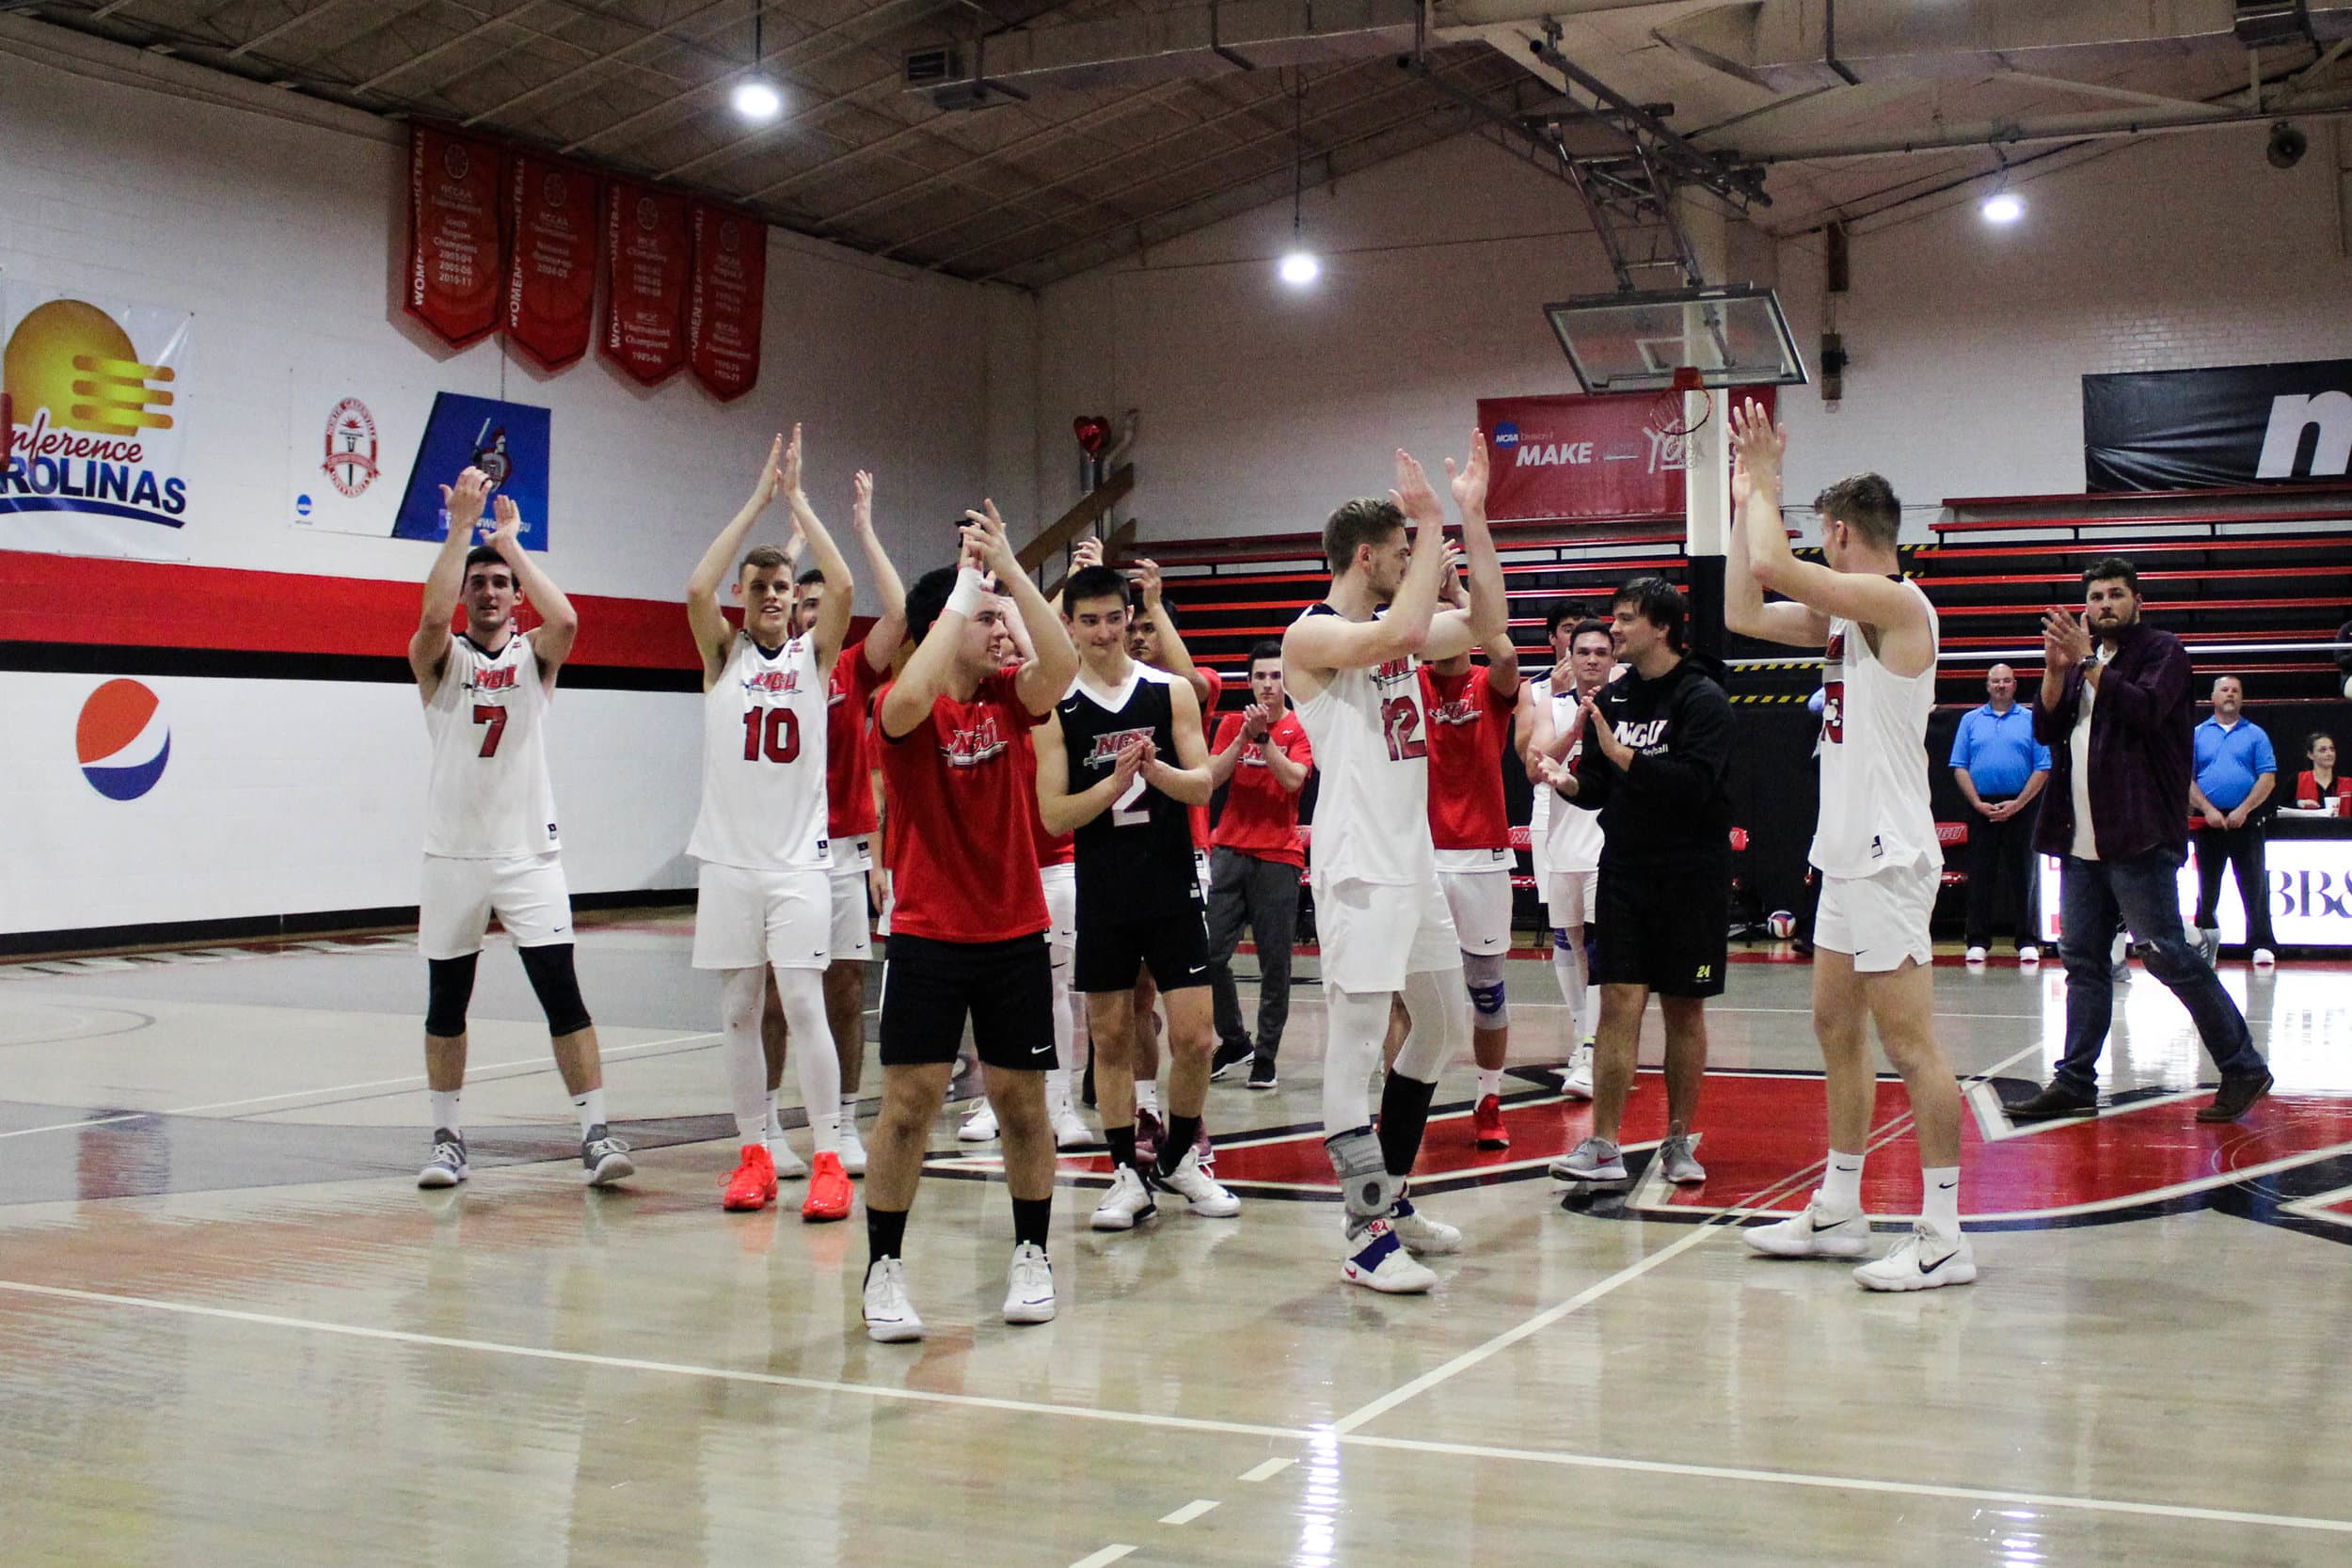 After the crusader win, the players cheer for the parents and others that came to support them.